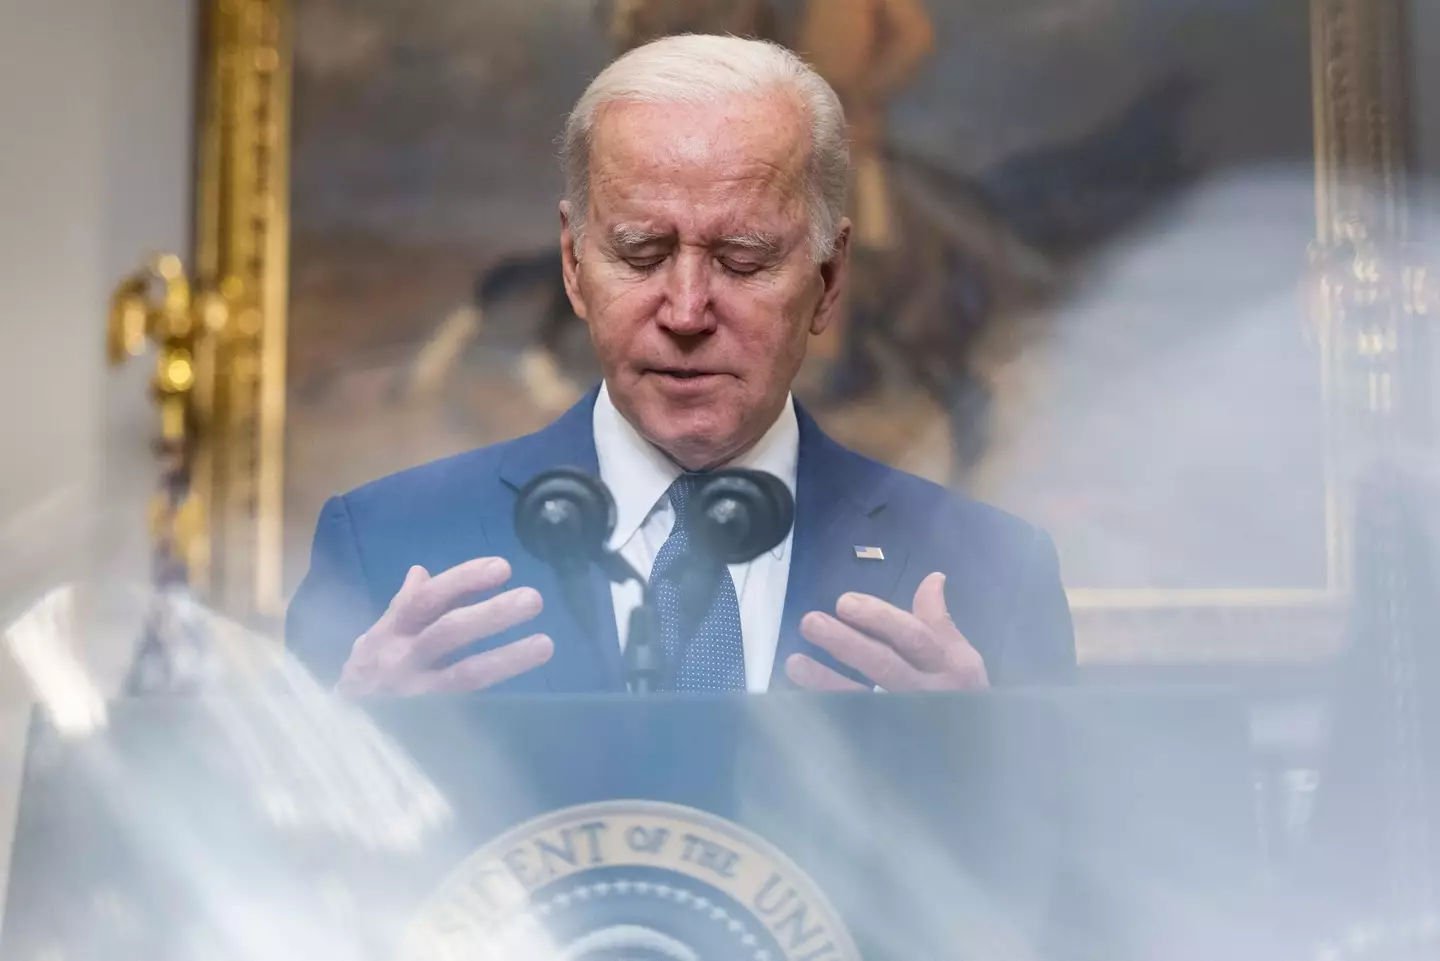 President Joe Biden addressed the nation following the tragedy in Texas.